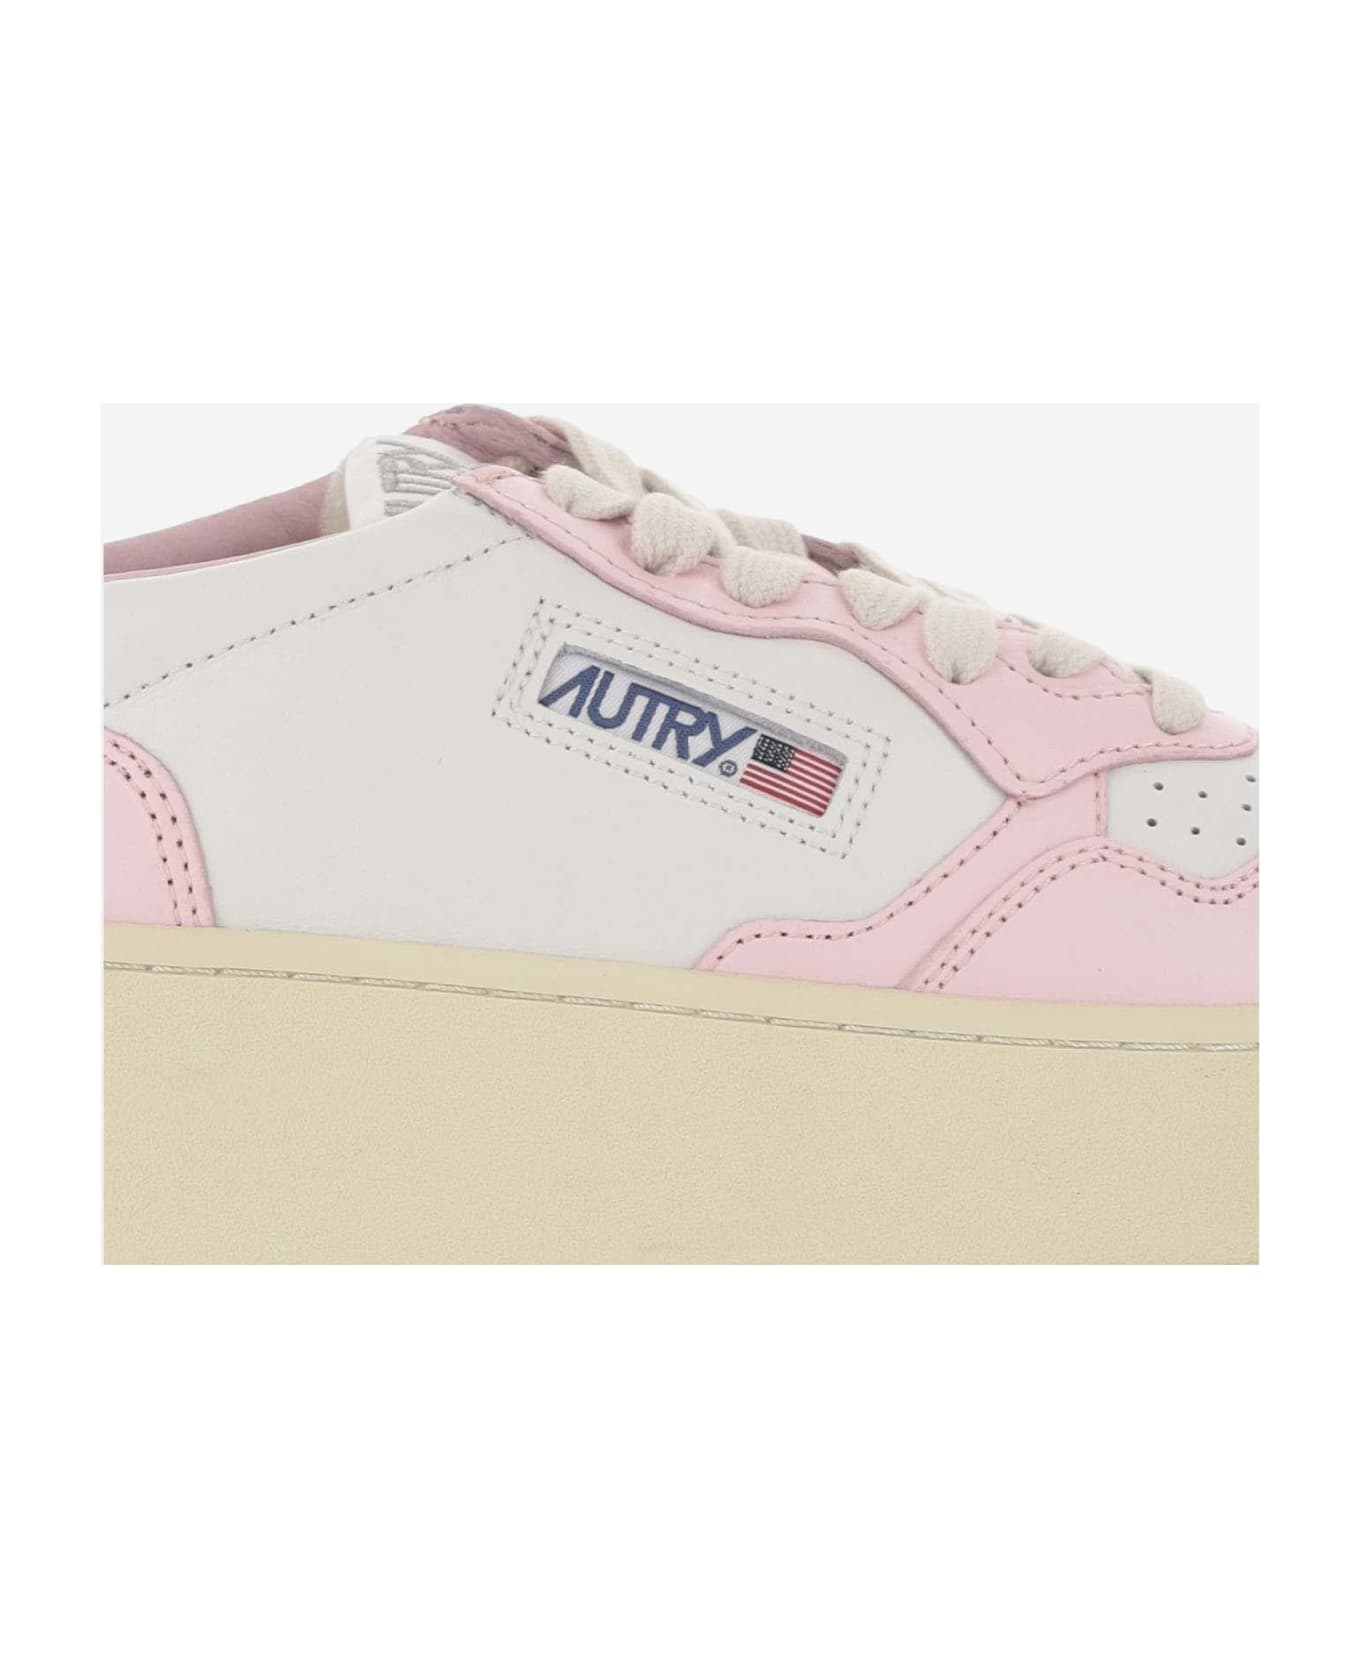 Autry Medalist Platform Low Leather Sneakers